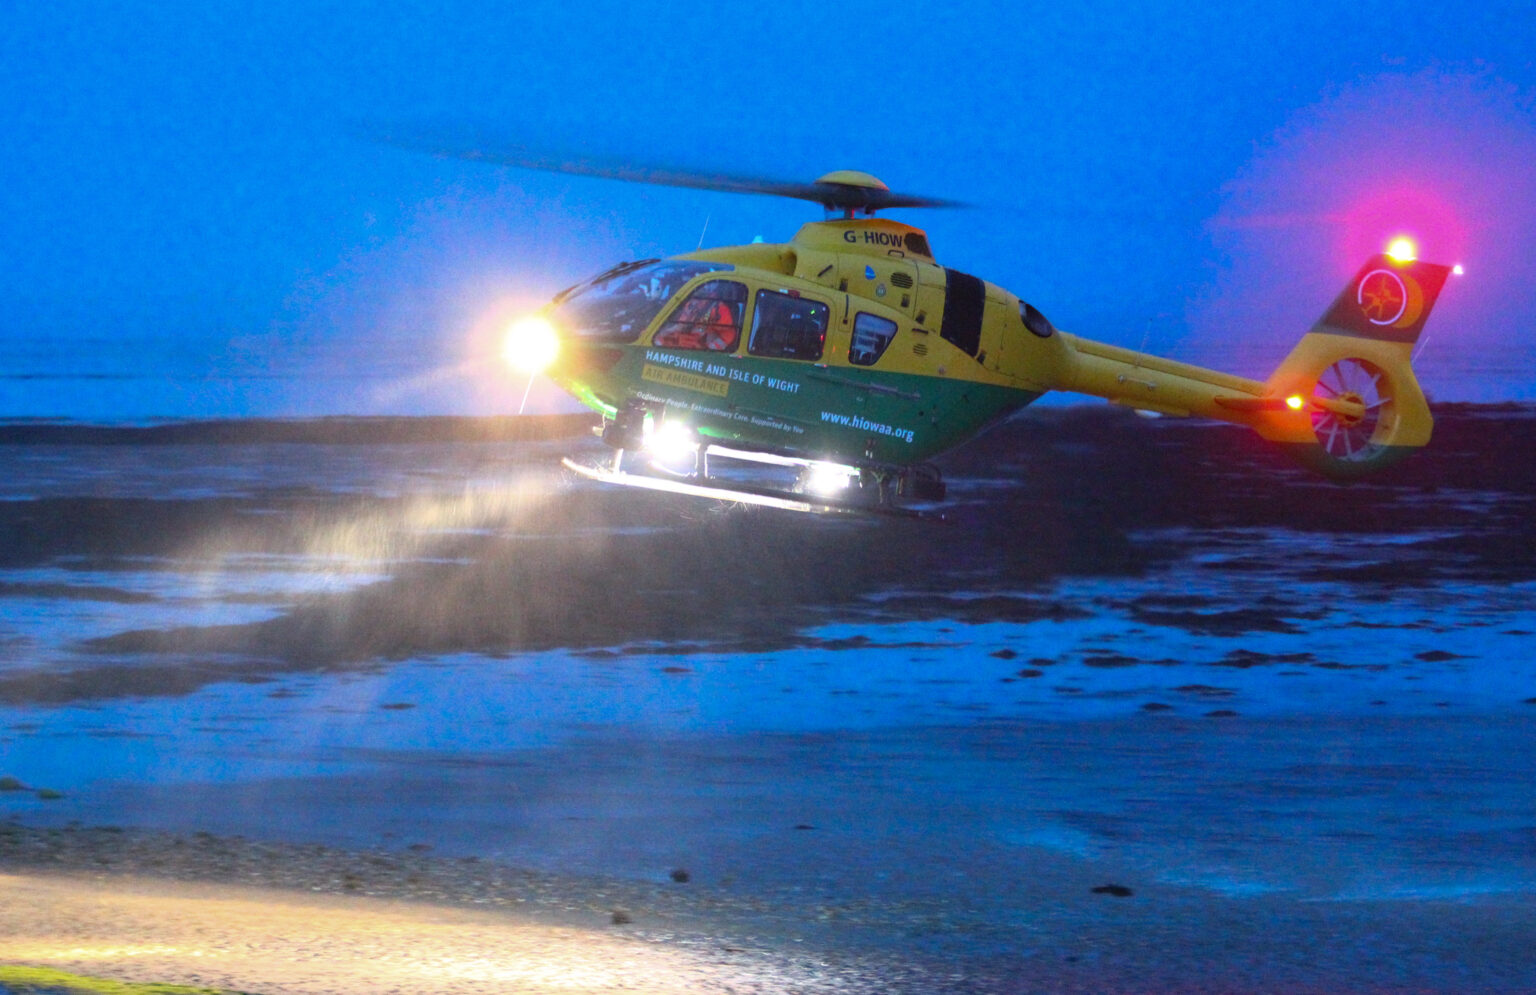 A helicopter coming in to land at night